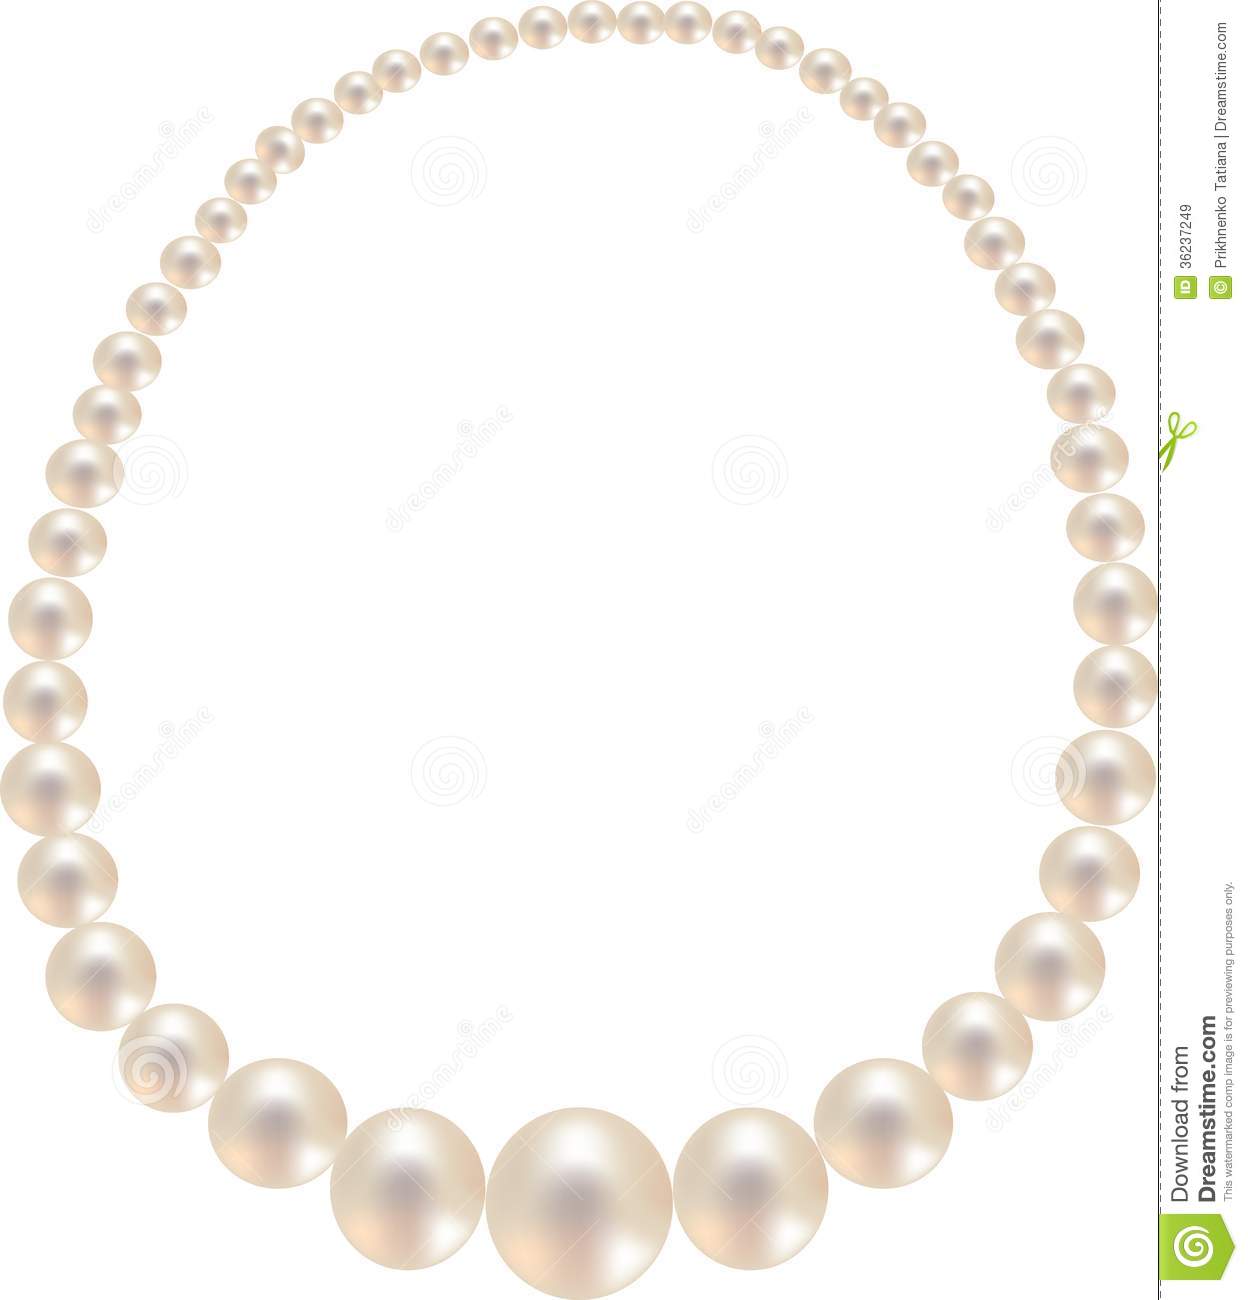 Pearl necklaces clipart.